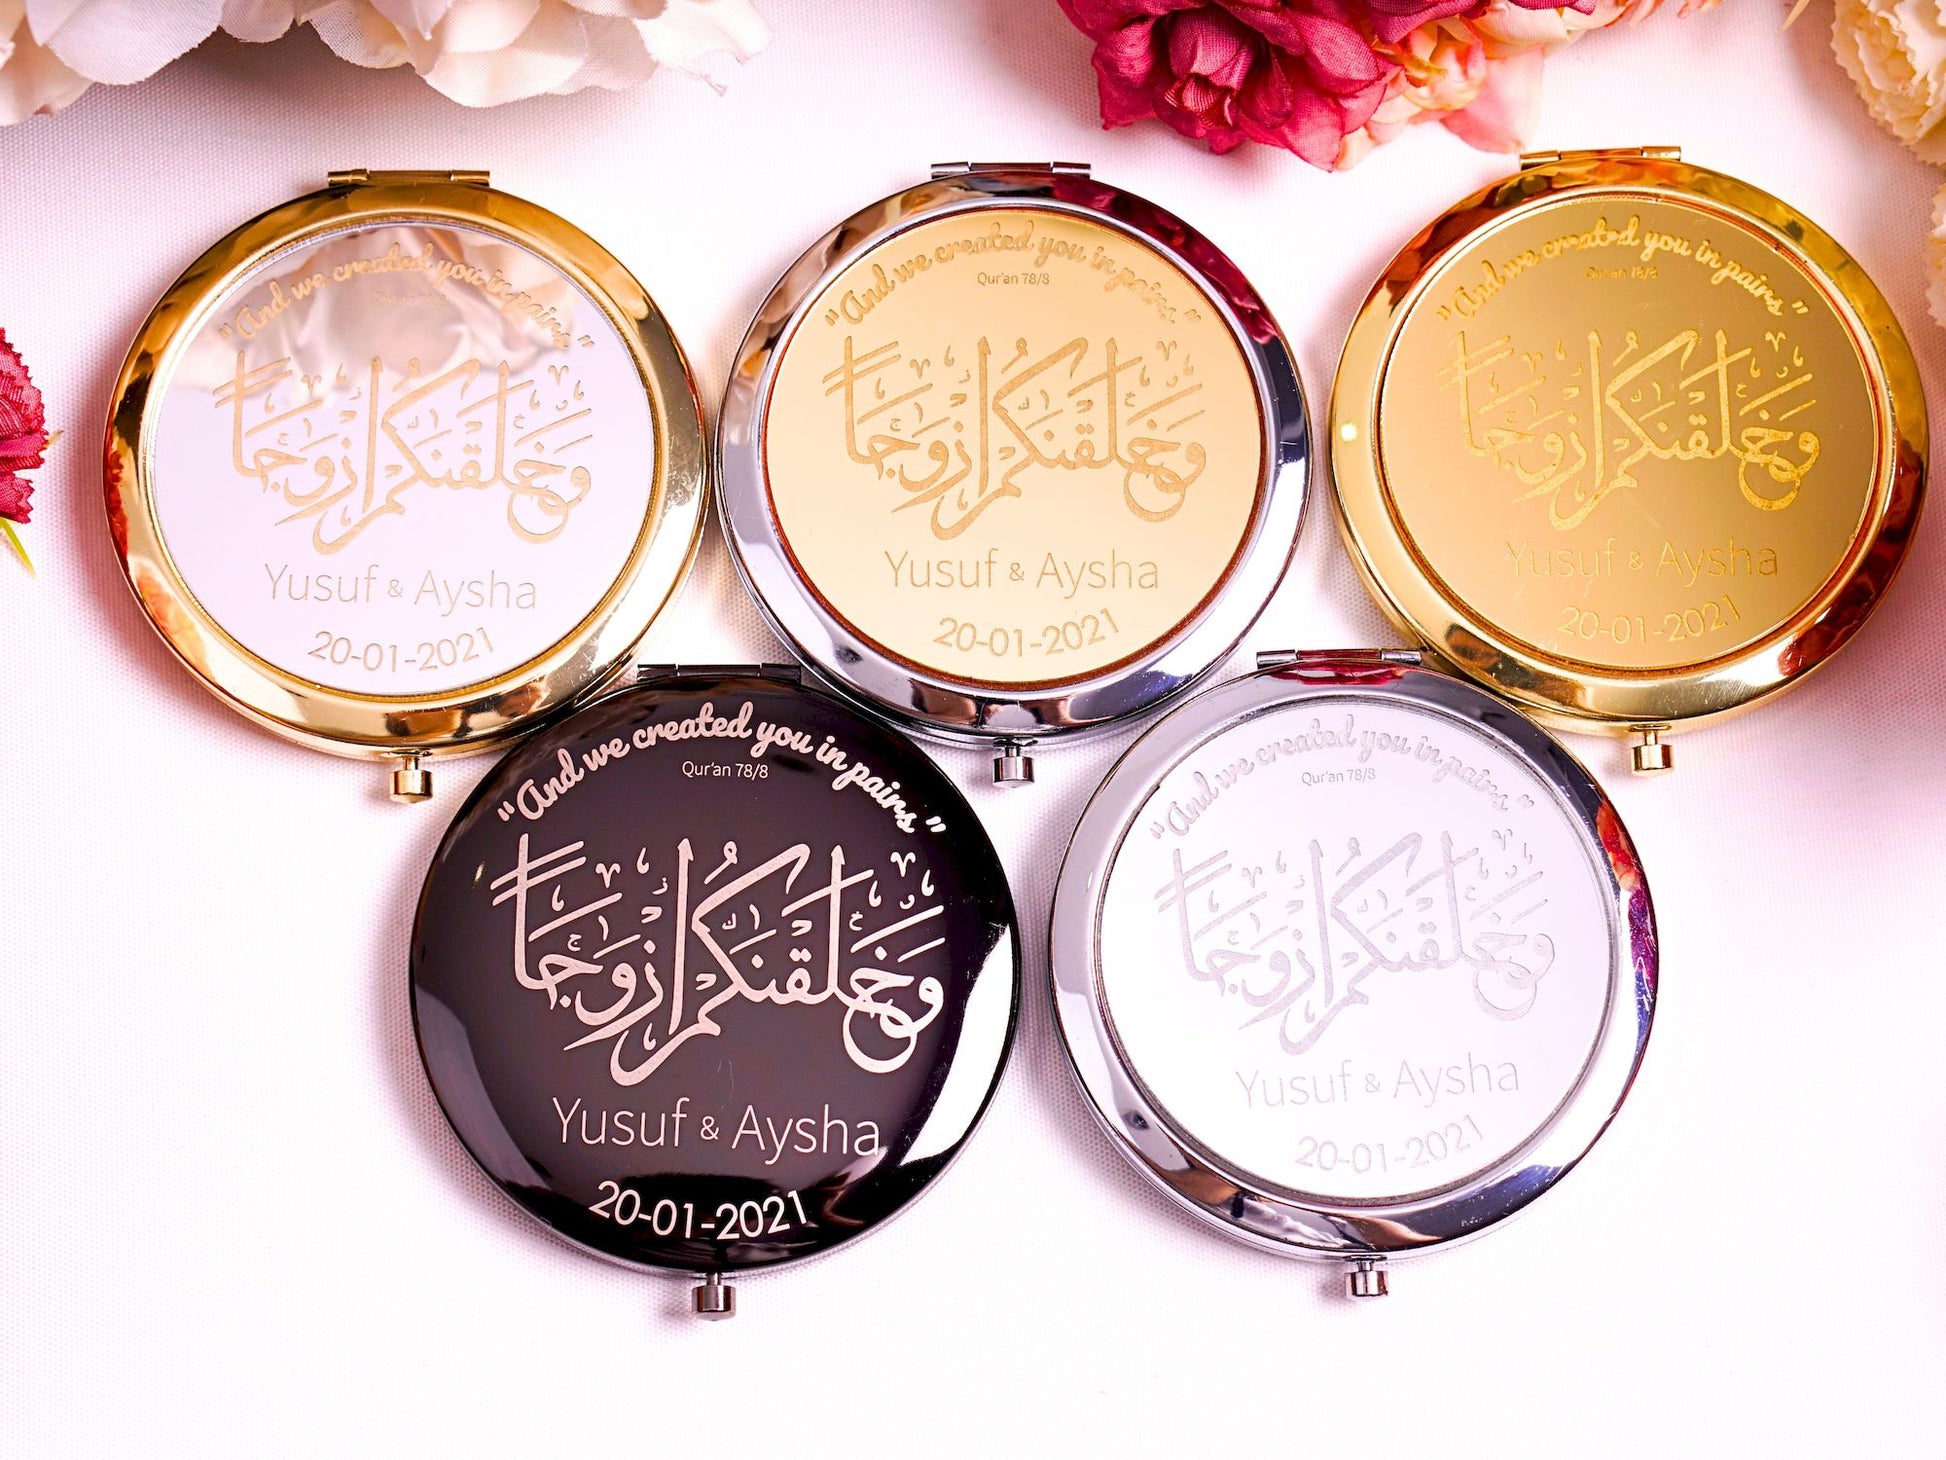 Personalized Wedding Favor Gold Mini Makeup Mirror in Gold Gift Box - Islamic Elite Favors is a handmade gift shop offering a wide variety of unique and personalized gifts for all occasions. Whether you're looking for the perfect Ramadan, Eid, Hajj, wedding gift or something special for a birthday, baby shower or anniversary, we have something for everyone. High quality, made with love.